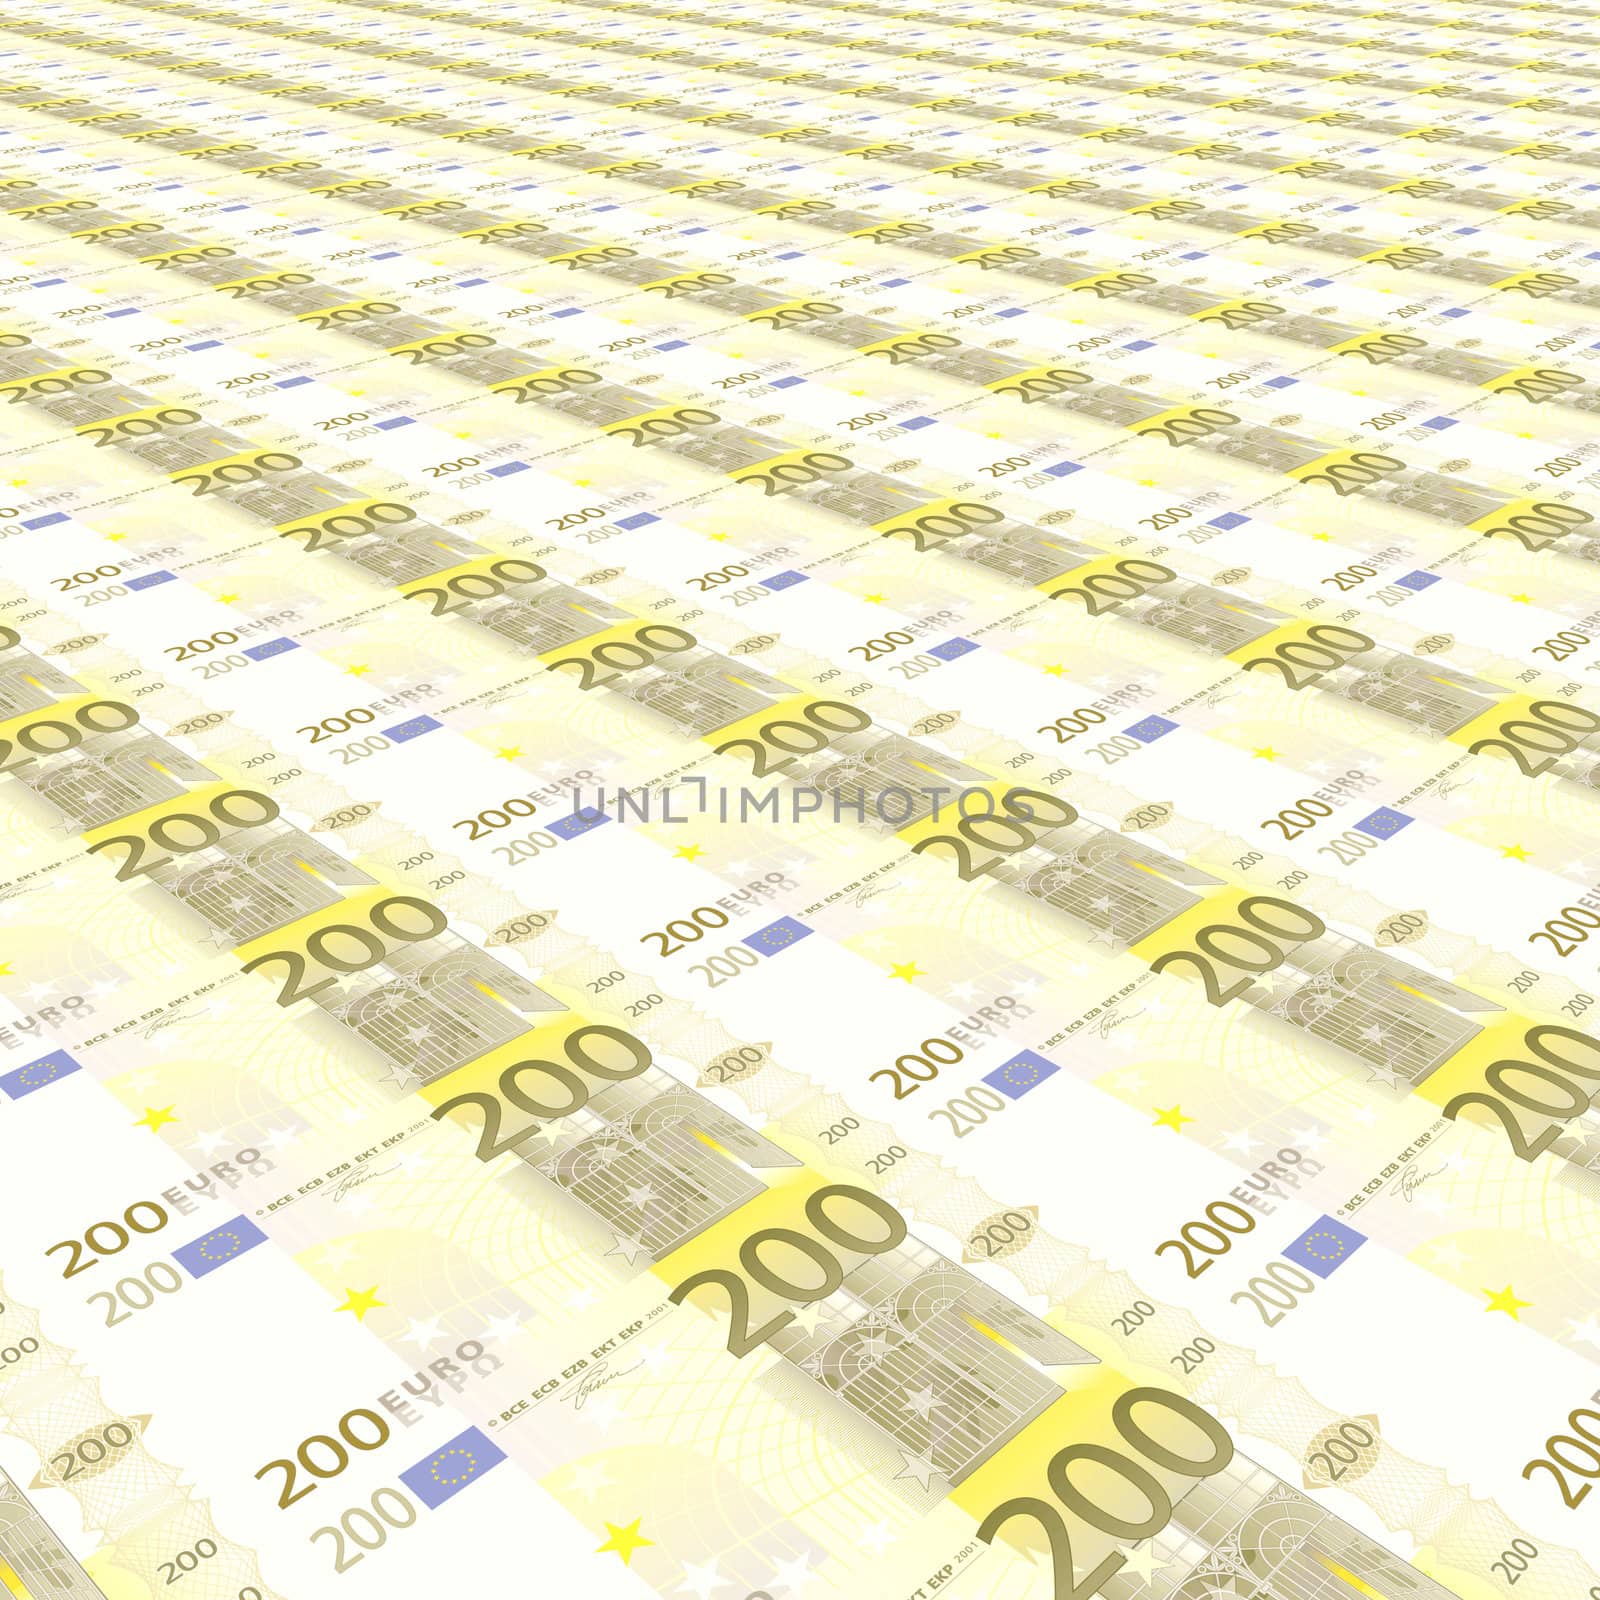 Endless rows of euro banknotes by adamr